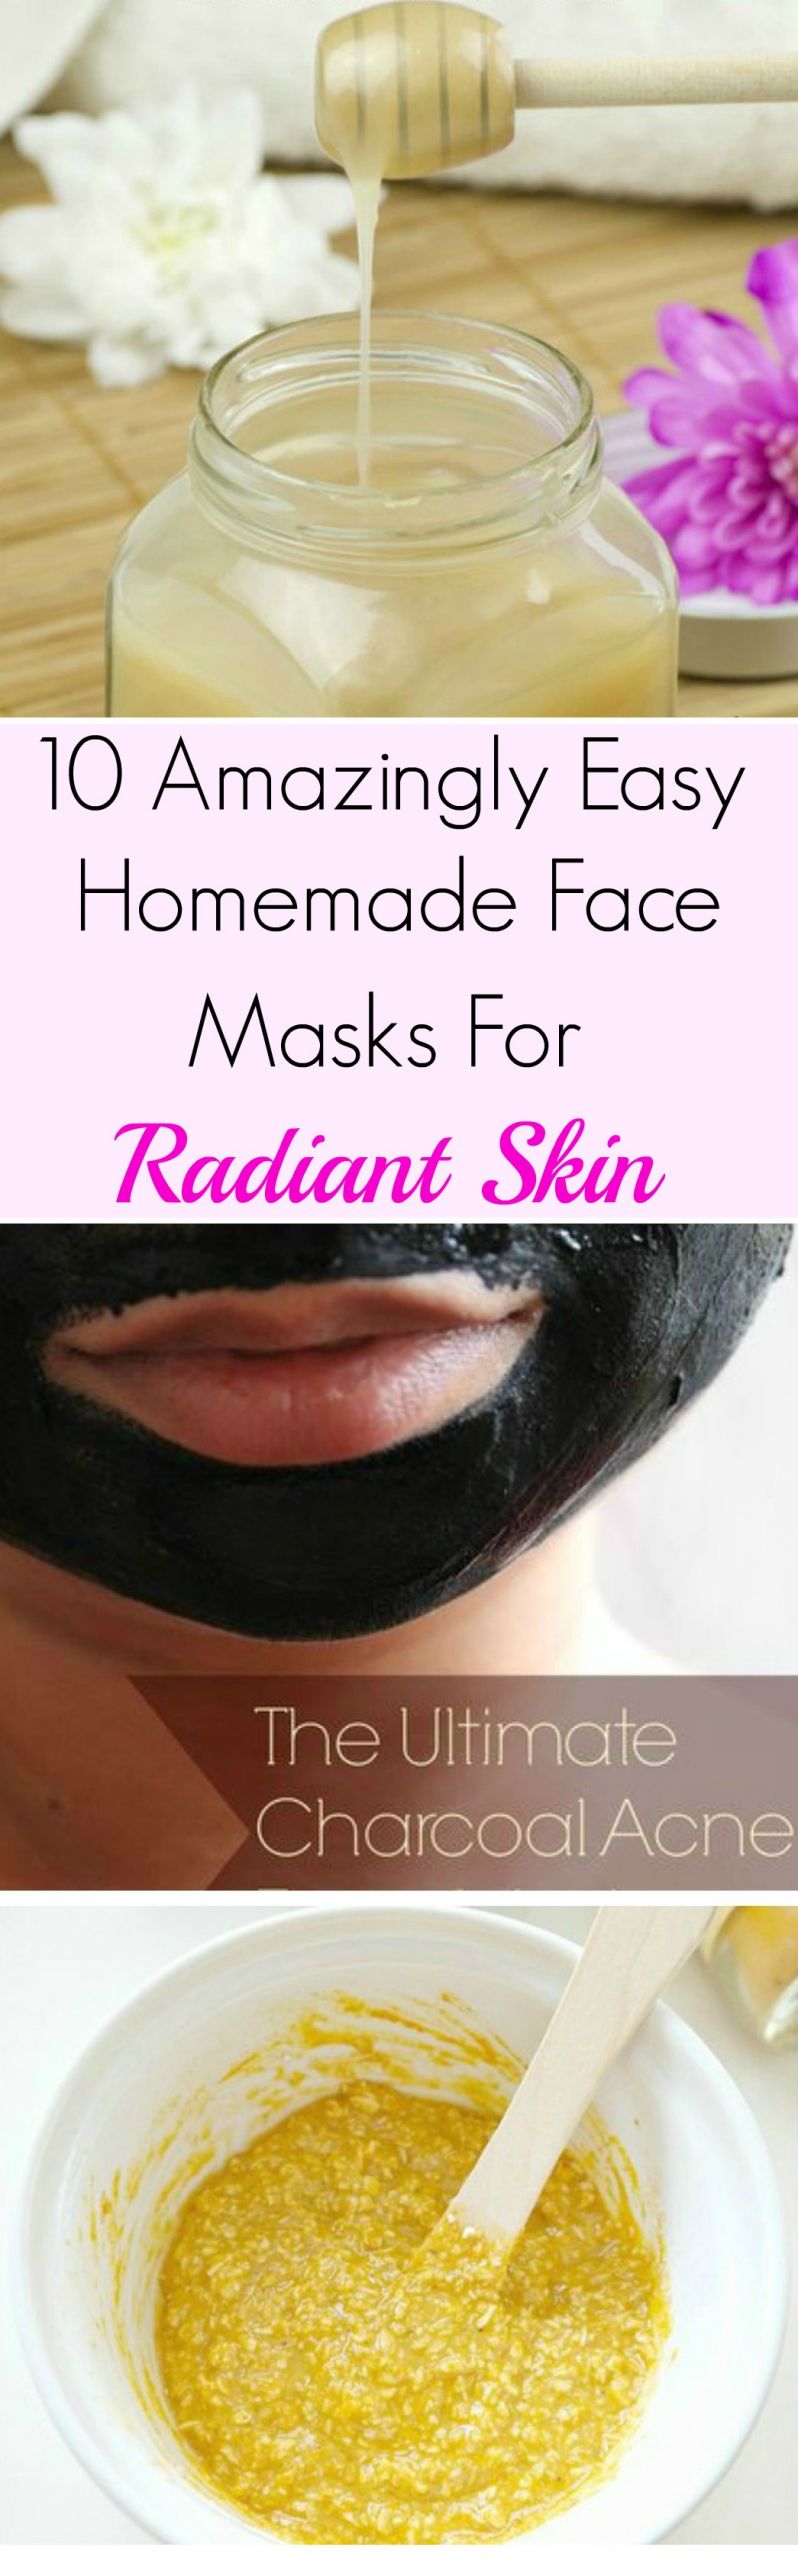 How To Make A DIY Face Mask
 10 Amazingly Easy Homemade Face Masks For Radiant Skin